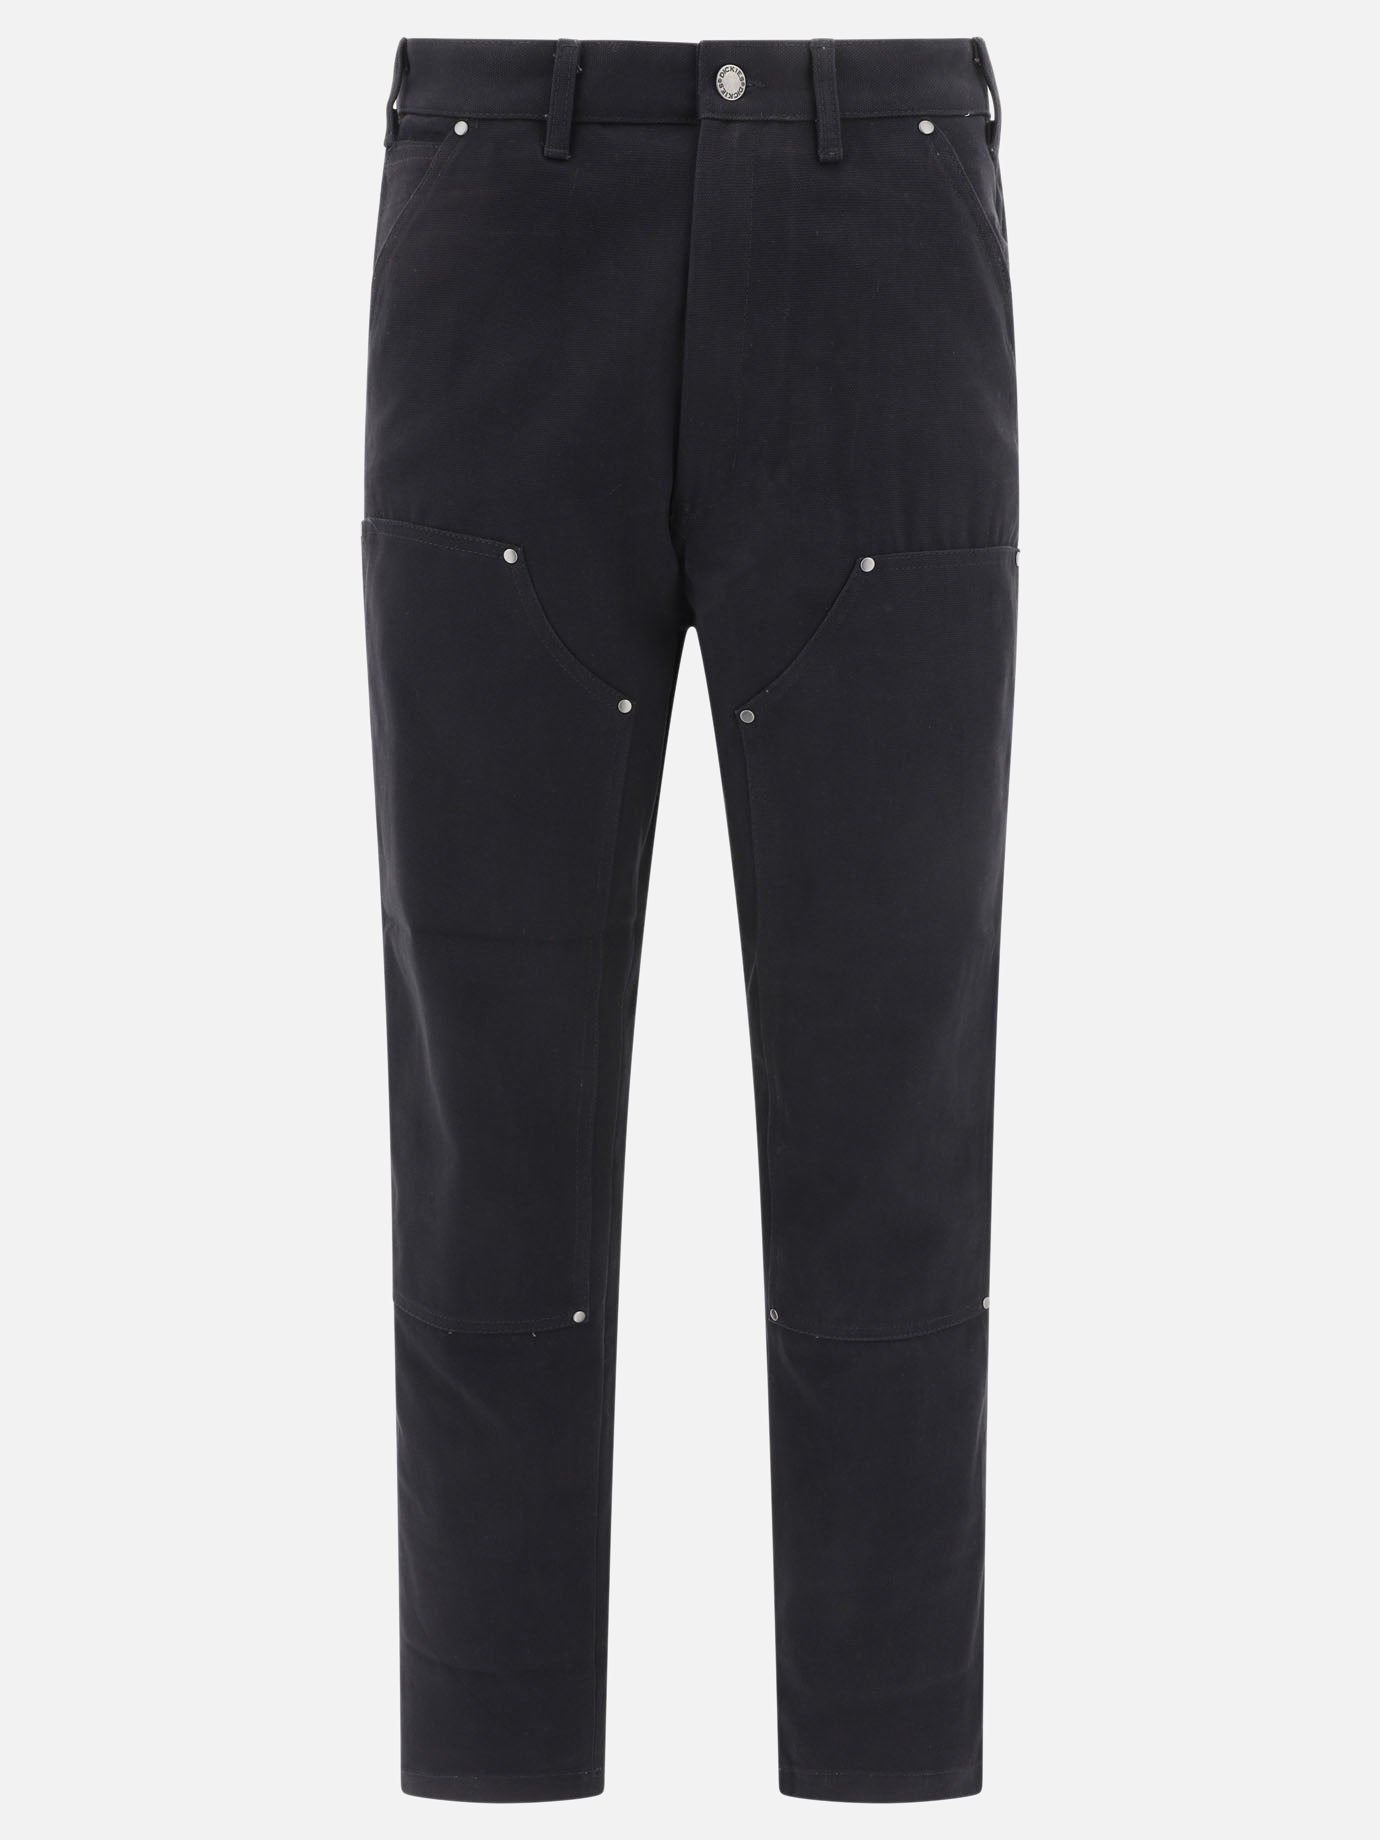 "Duck Canvas" trousers